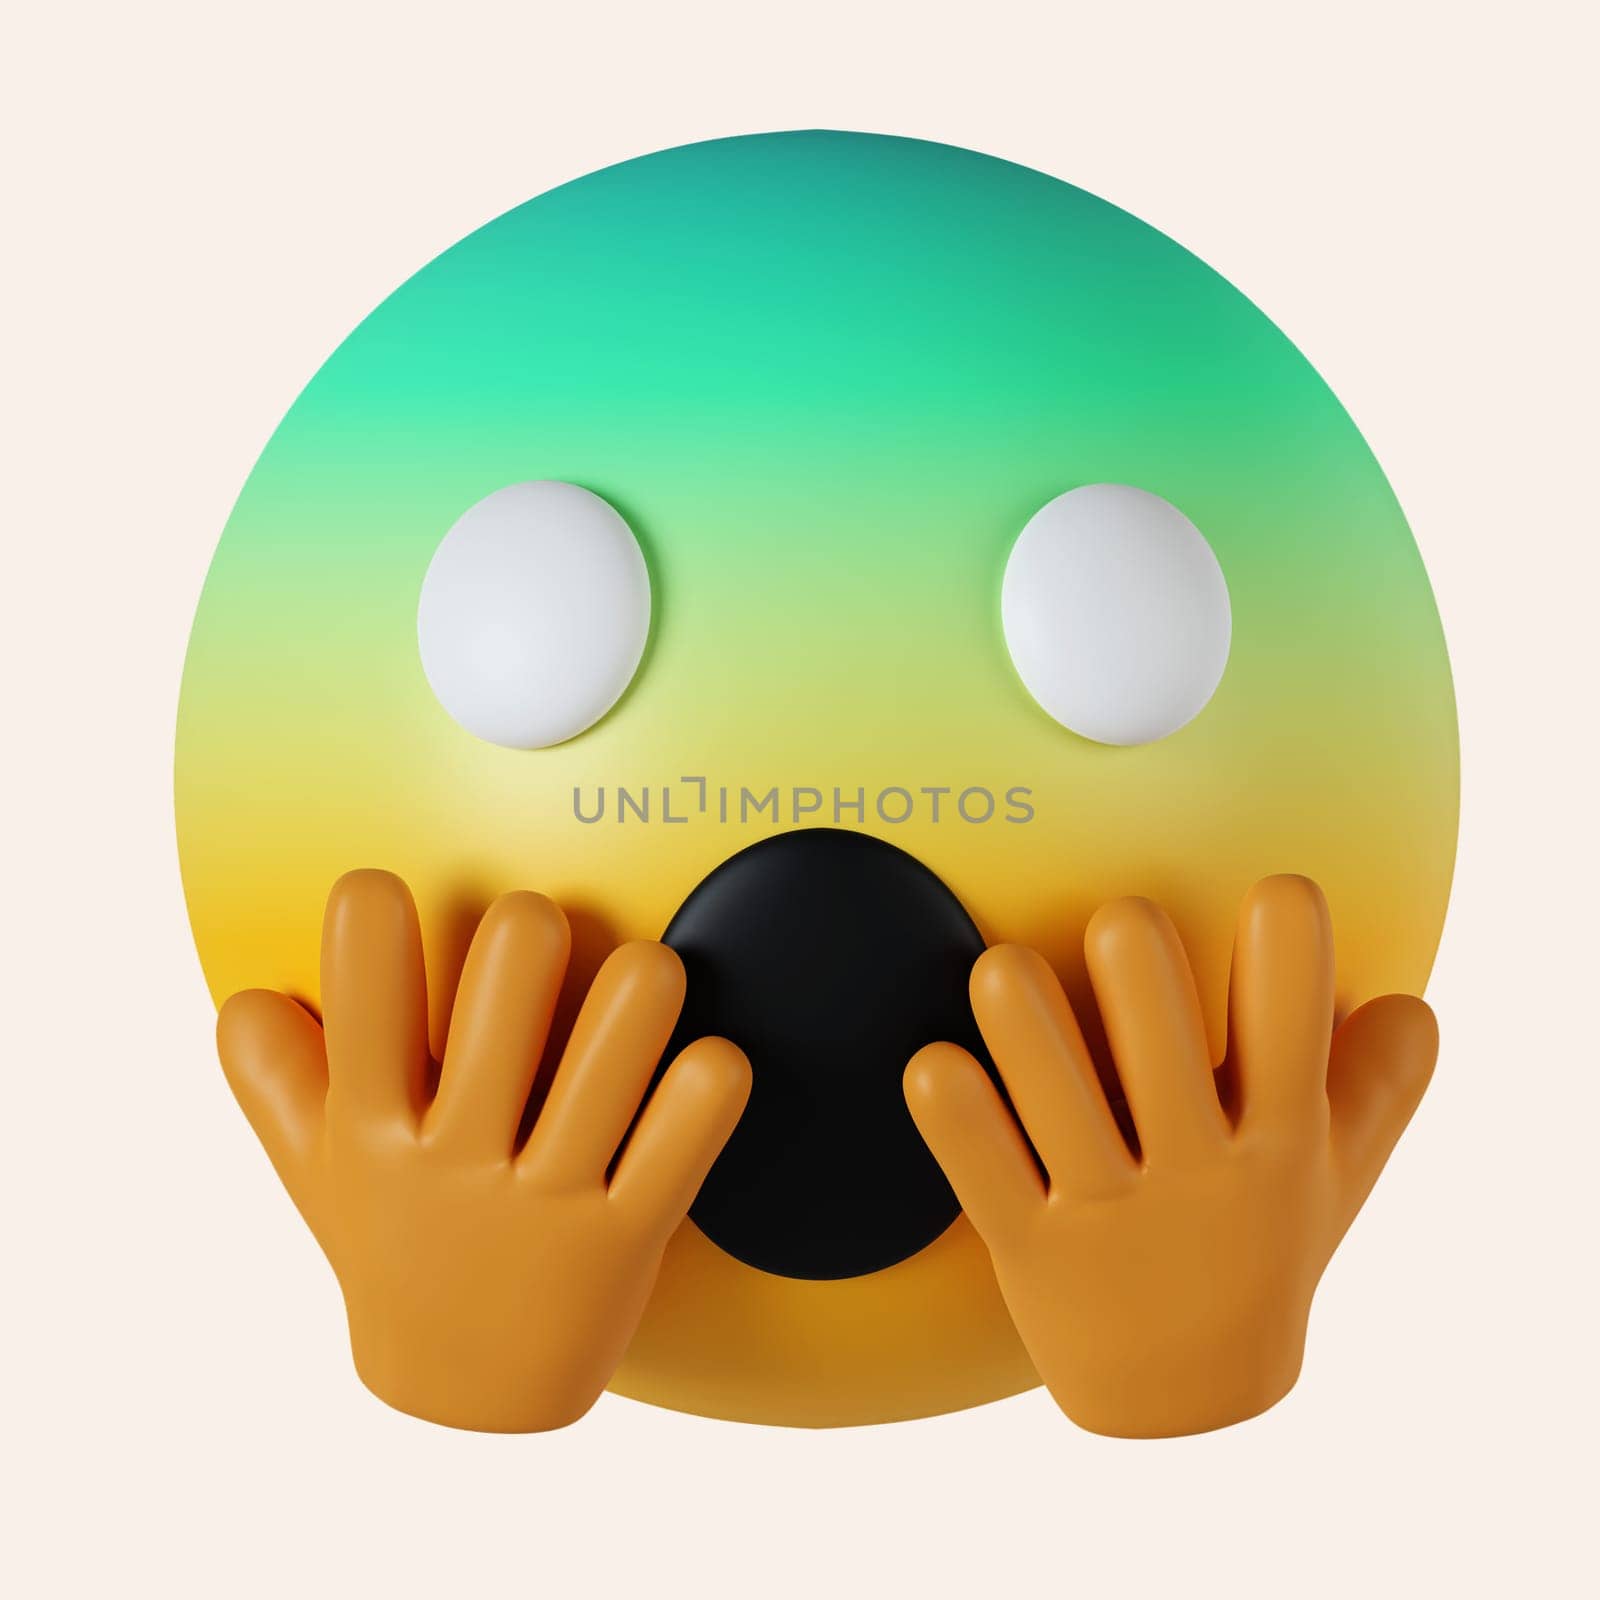 3d Screaming emoticon emoji with two hands holding the face. icon isolated on gray background. 3d rendering illustration. Clipping path. by meepiangraphic